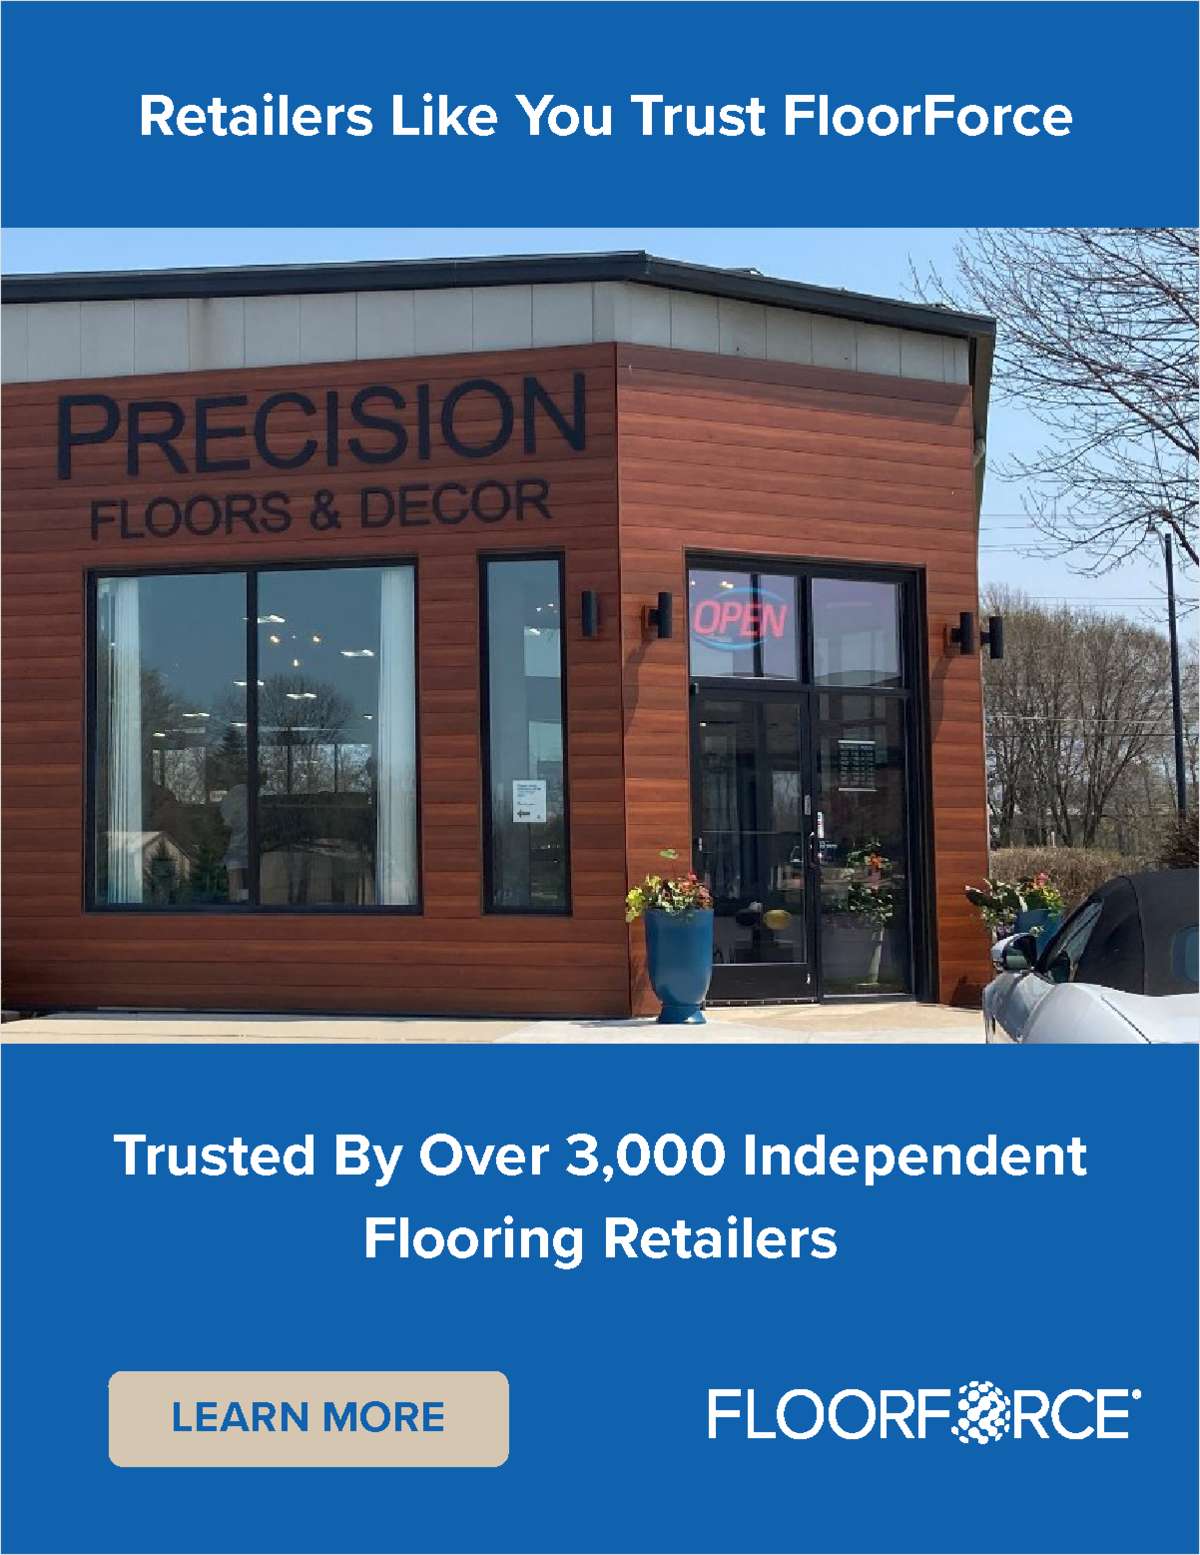 See How Your Retail Business Can Benefit from FloorForce Expertise